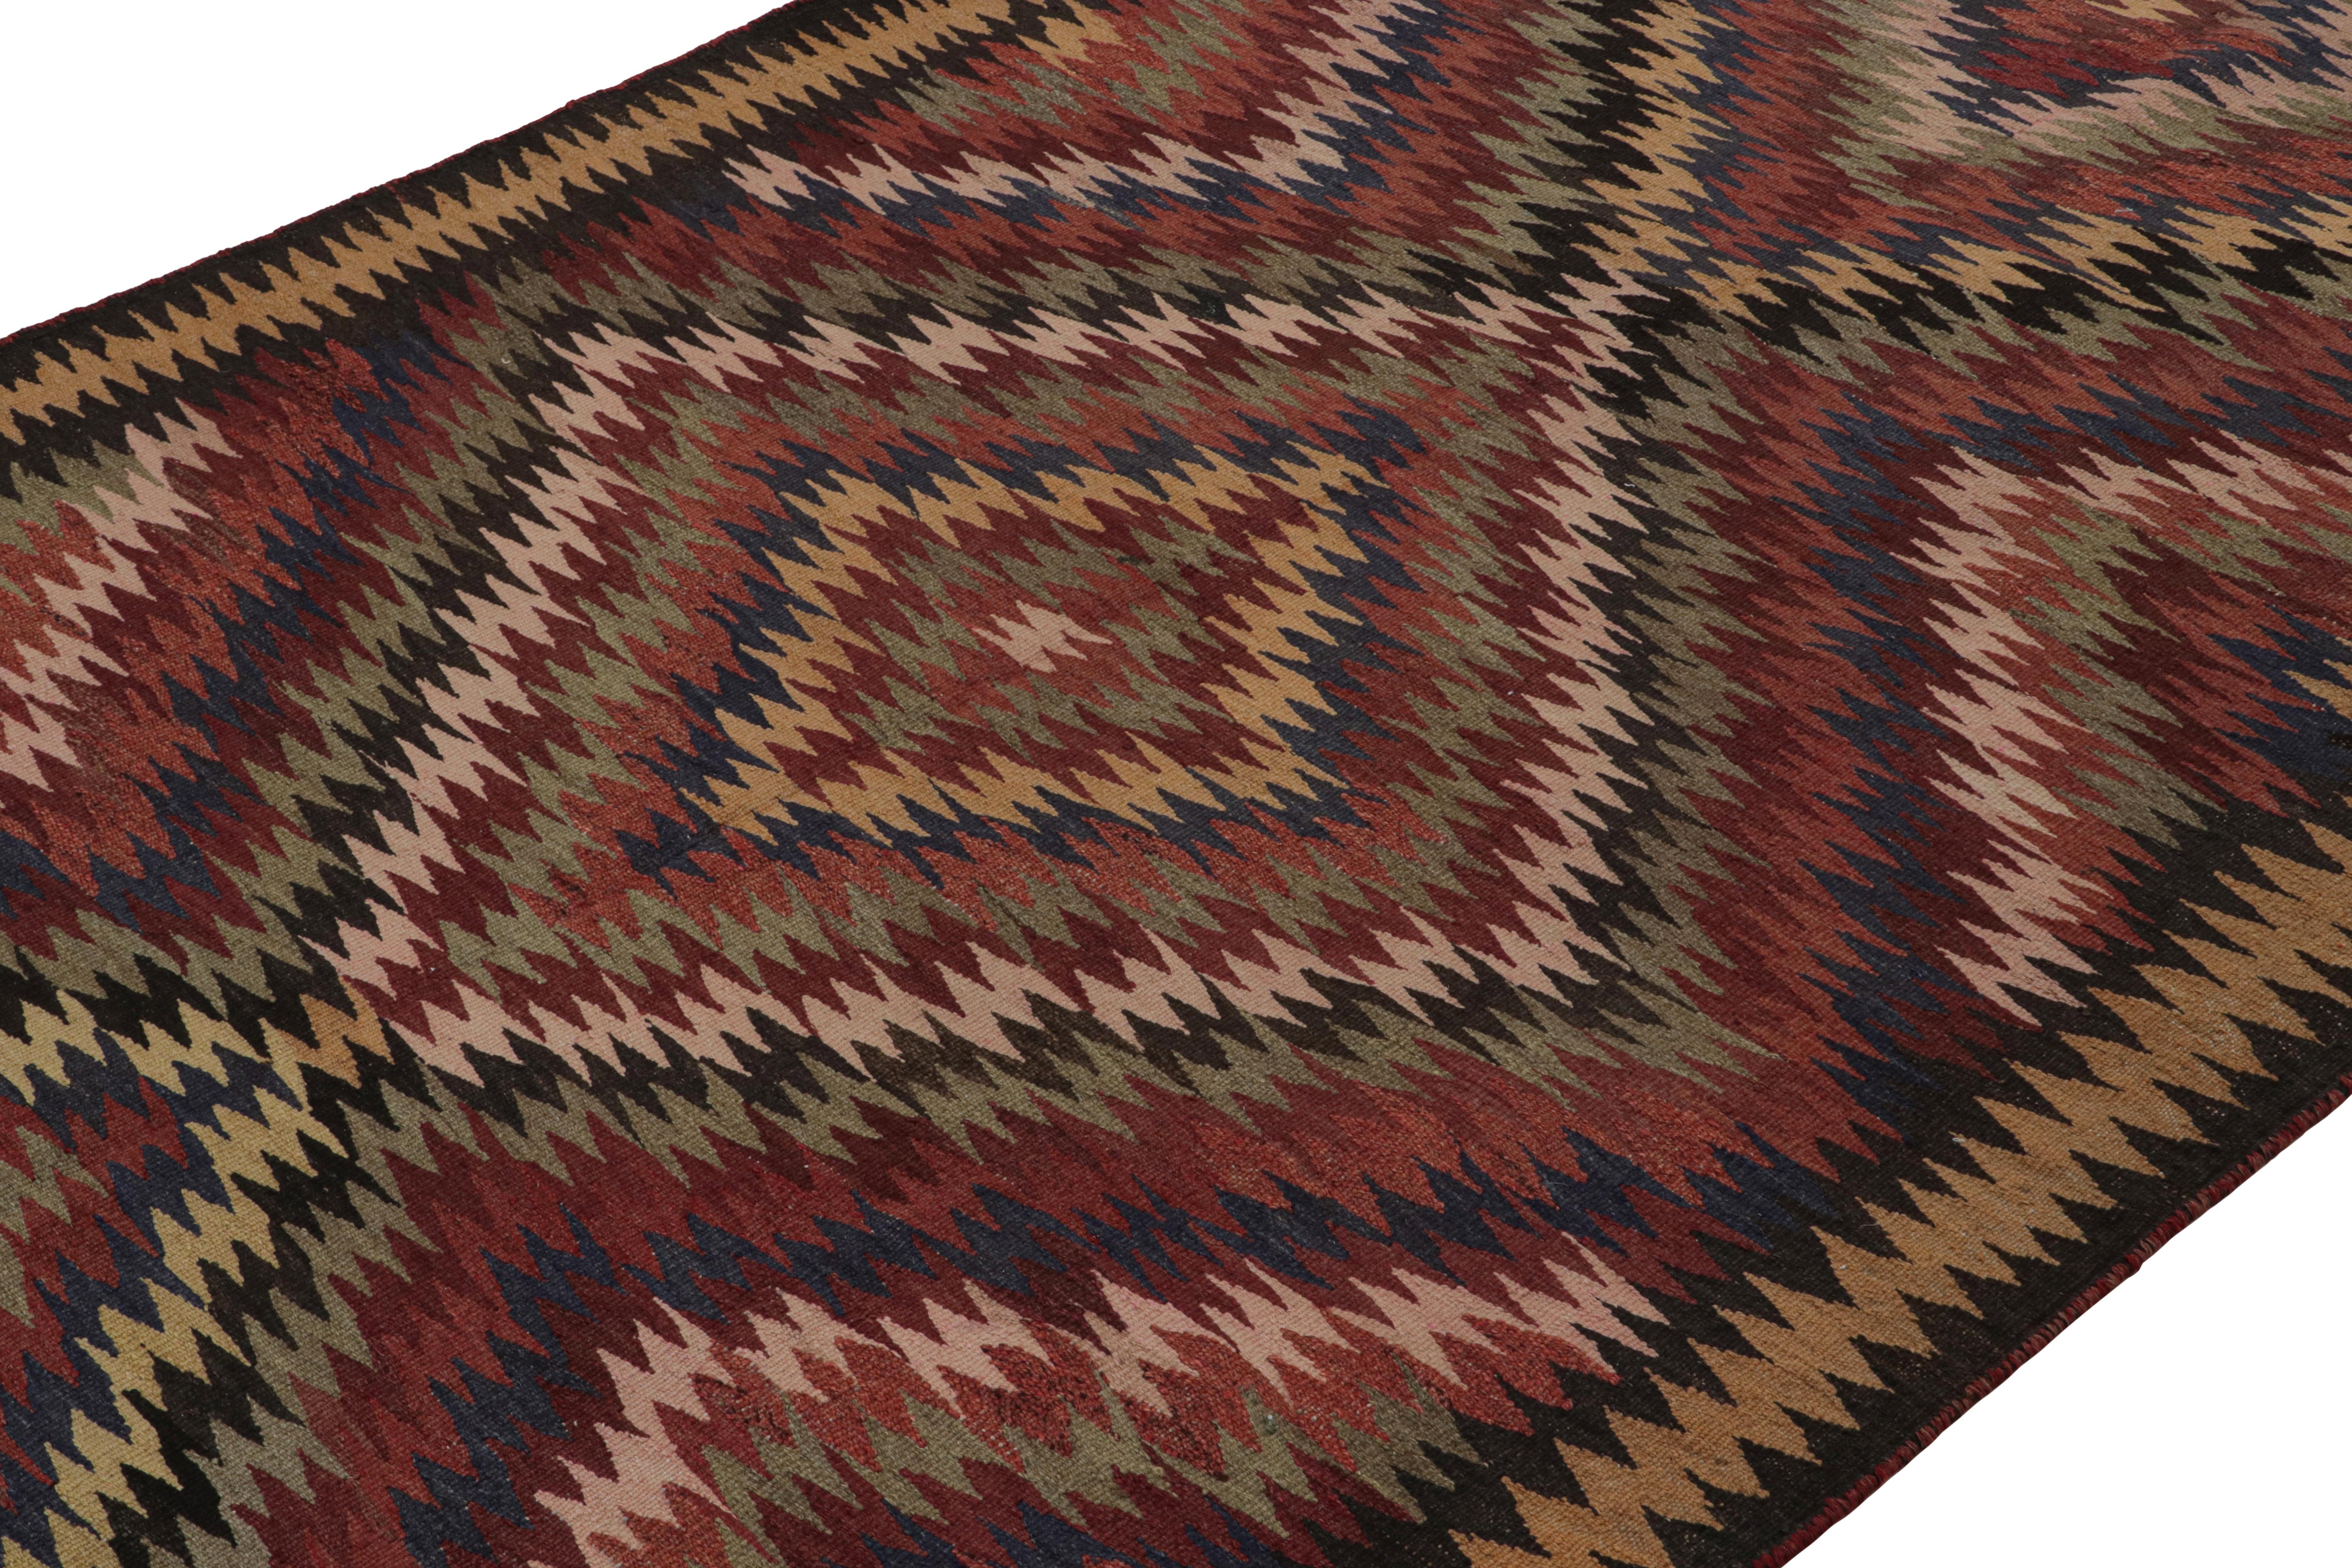 Afghan Vintage Persian Kilim in Polychromatic Patterns, from Rug & Kilim For Sale